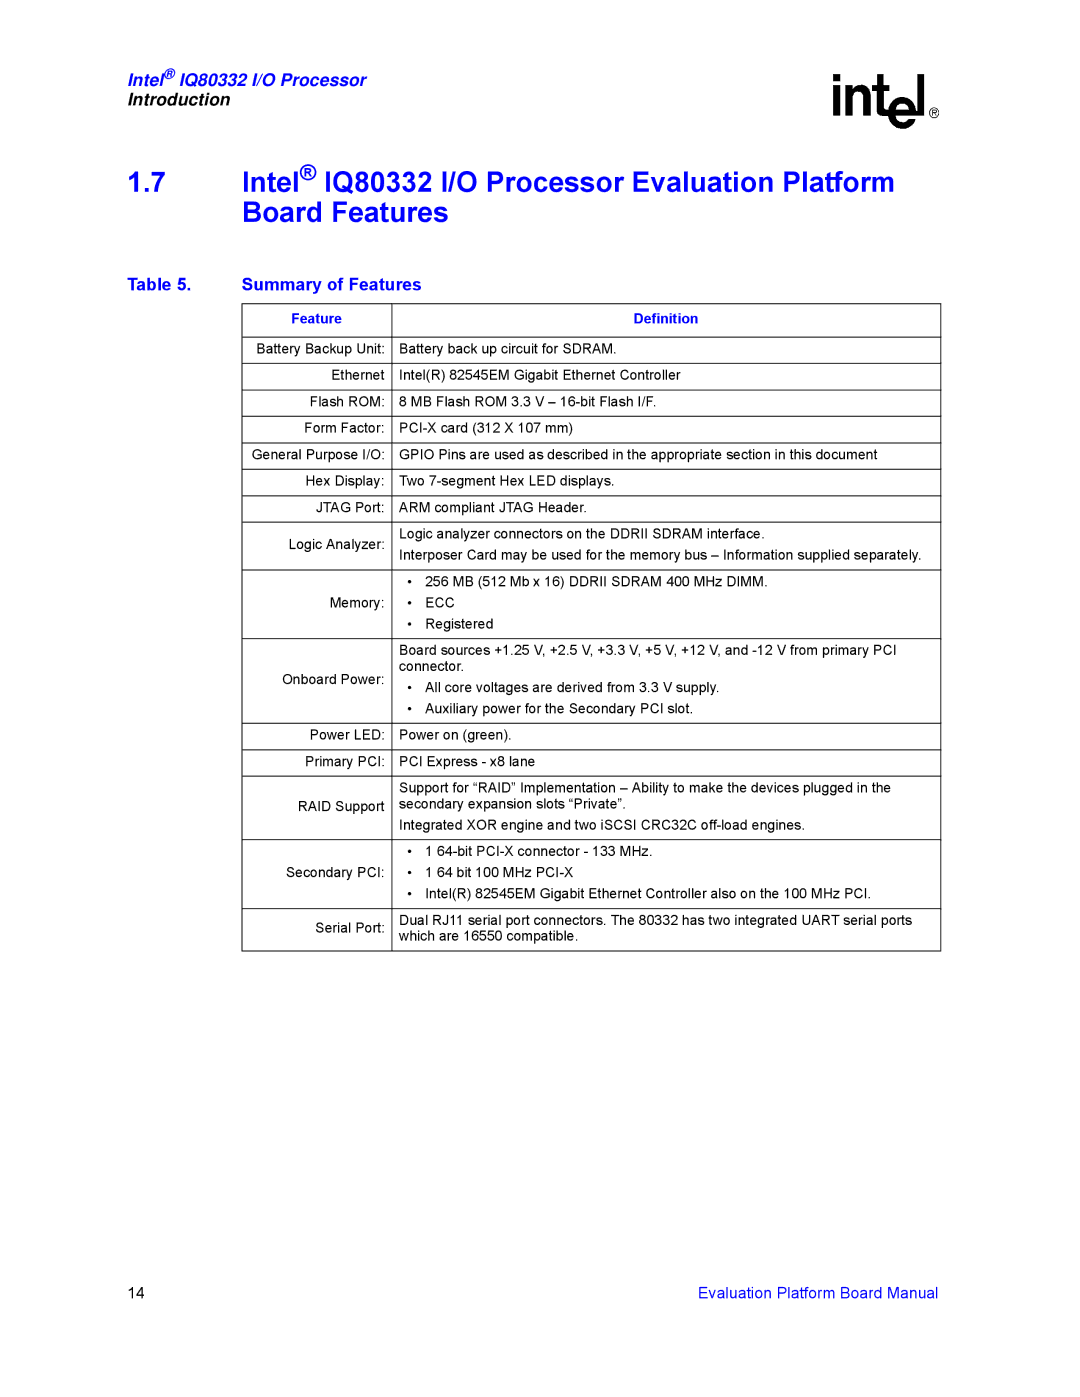 Intel IQ80332 manual Summary of Features, Feature Definition 